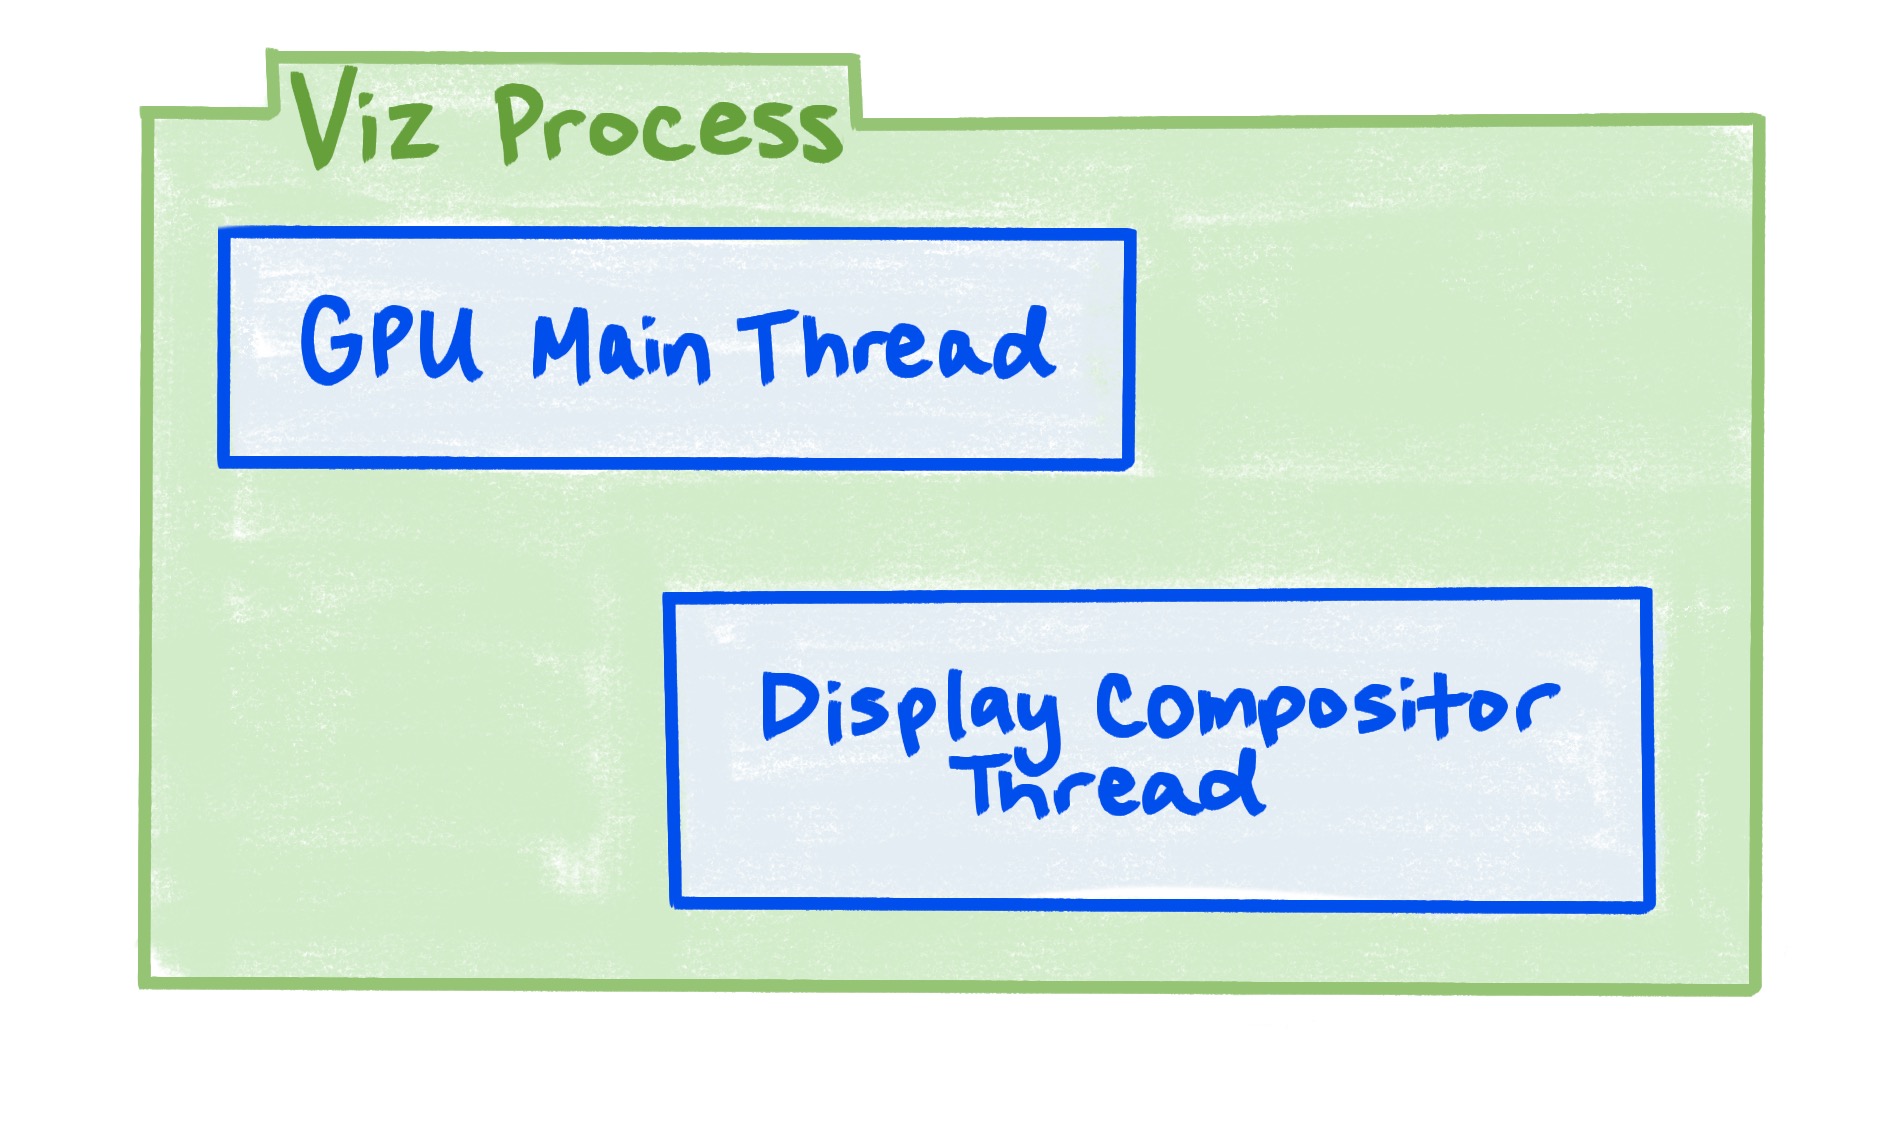 The Viz process includes the GPU main thread, and the display compositor thread.